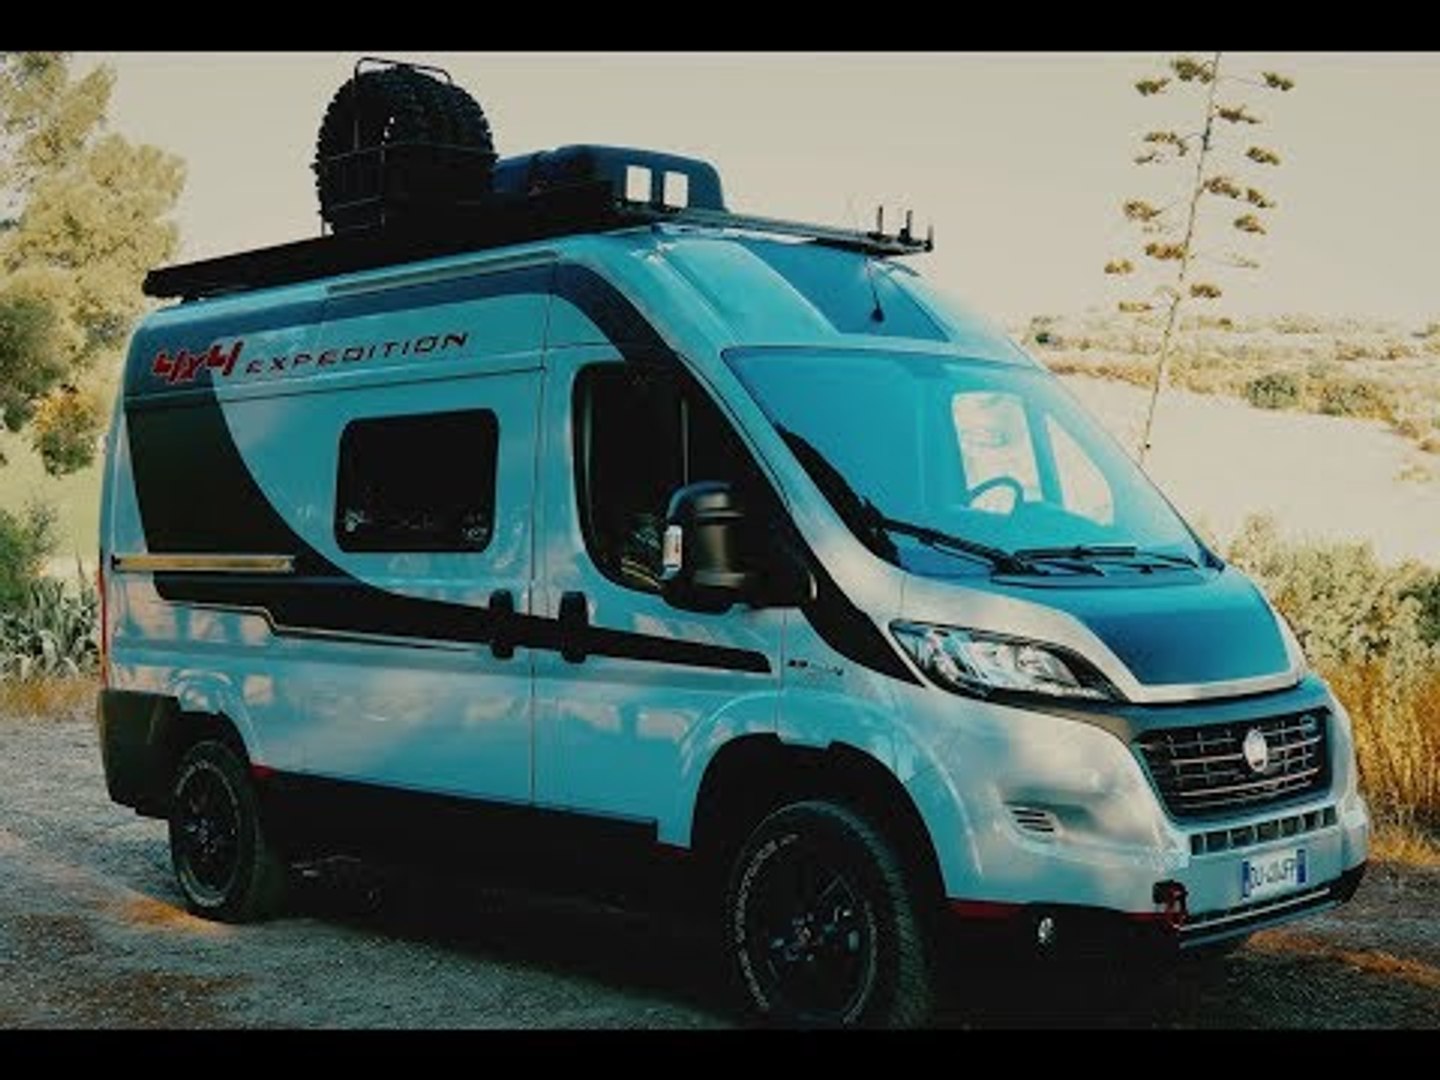 Fiat Ducato 4x4 Expedition 2017 - video Dailymotion